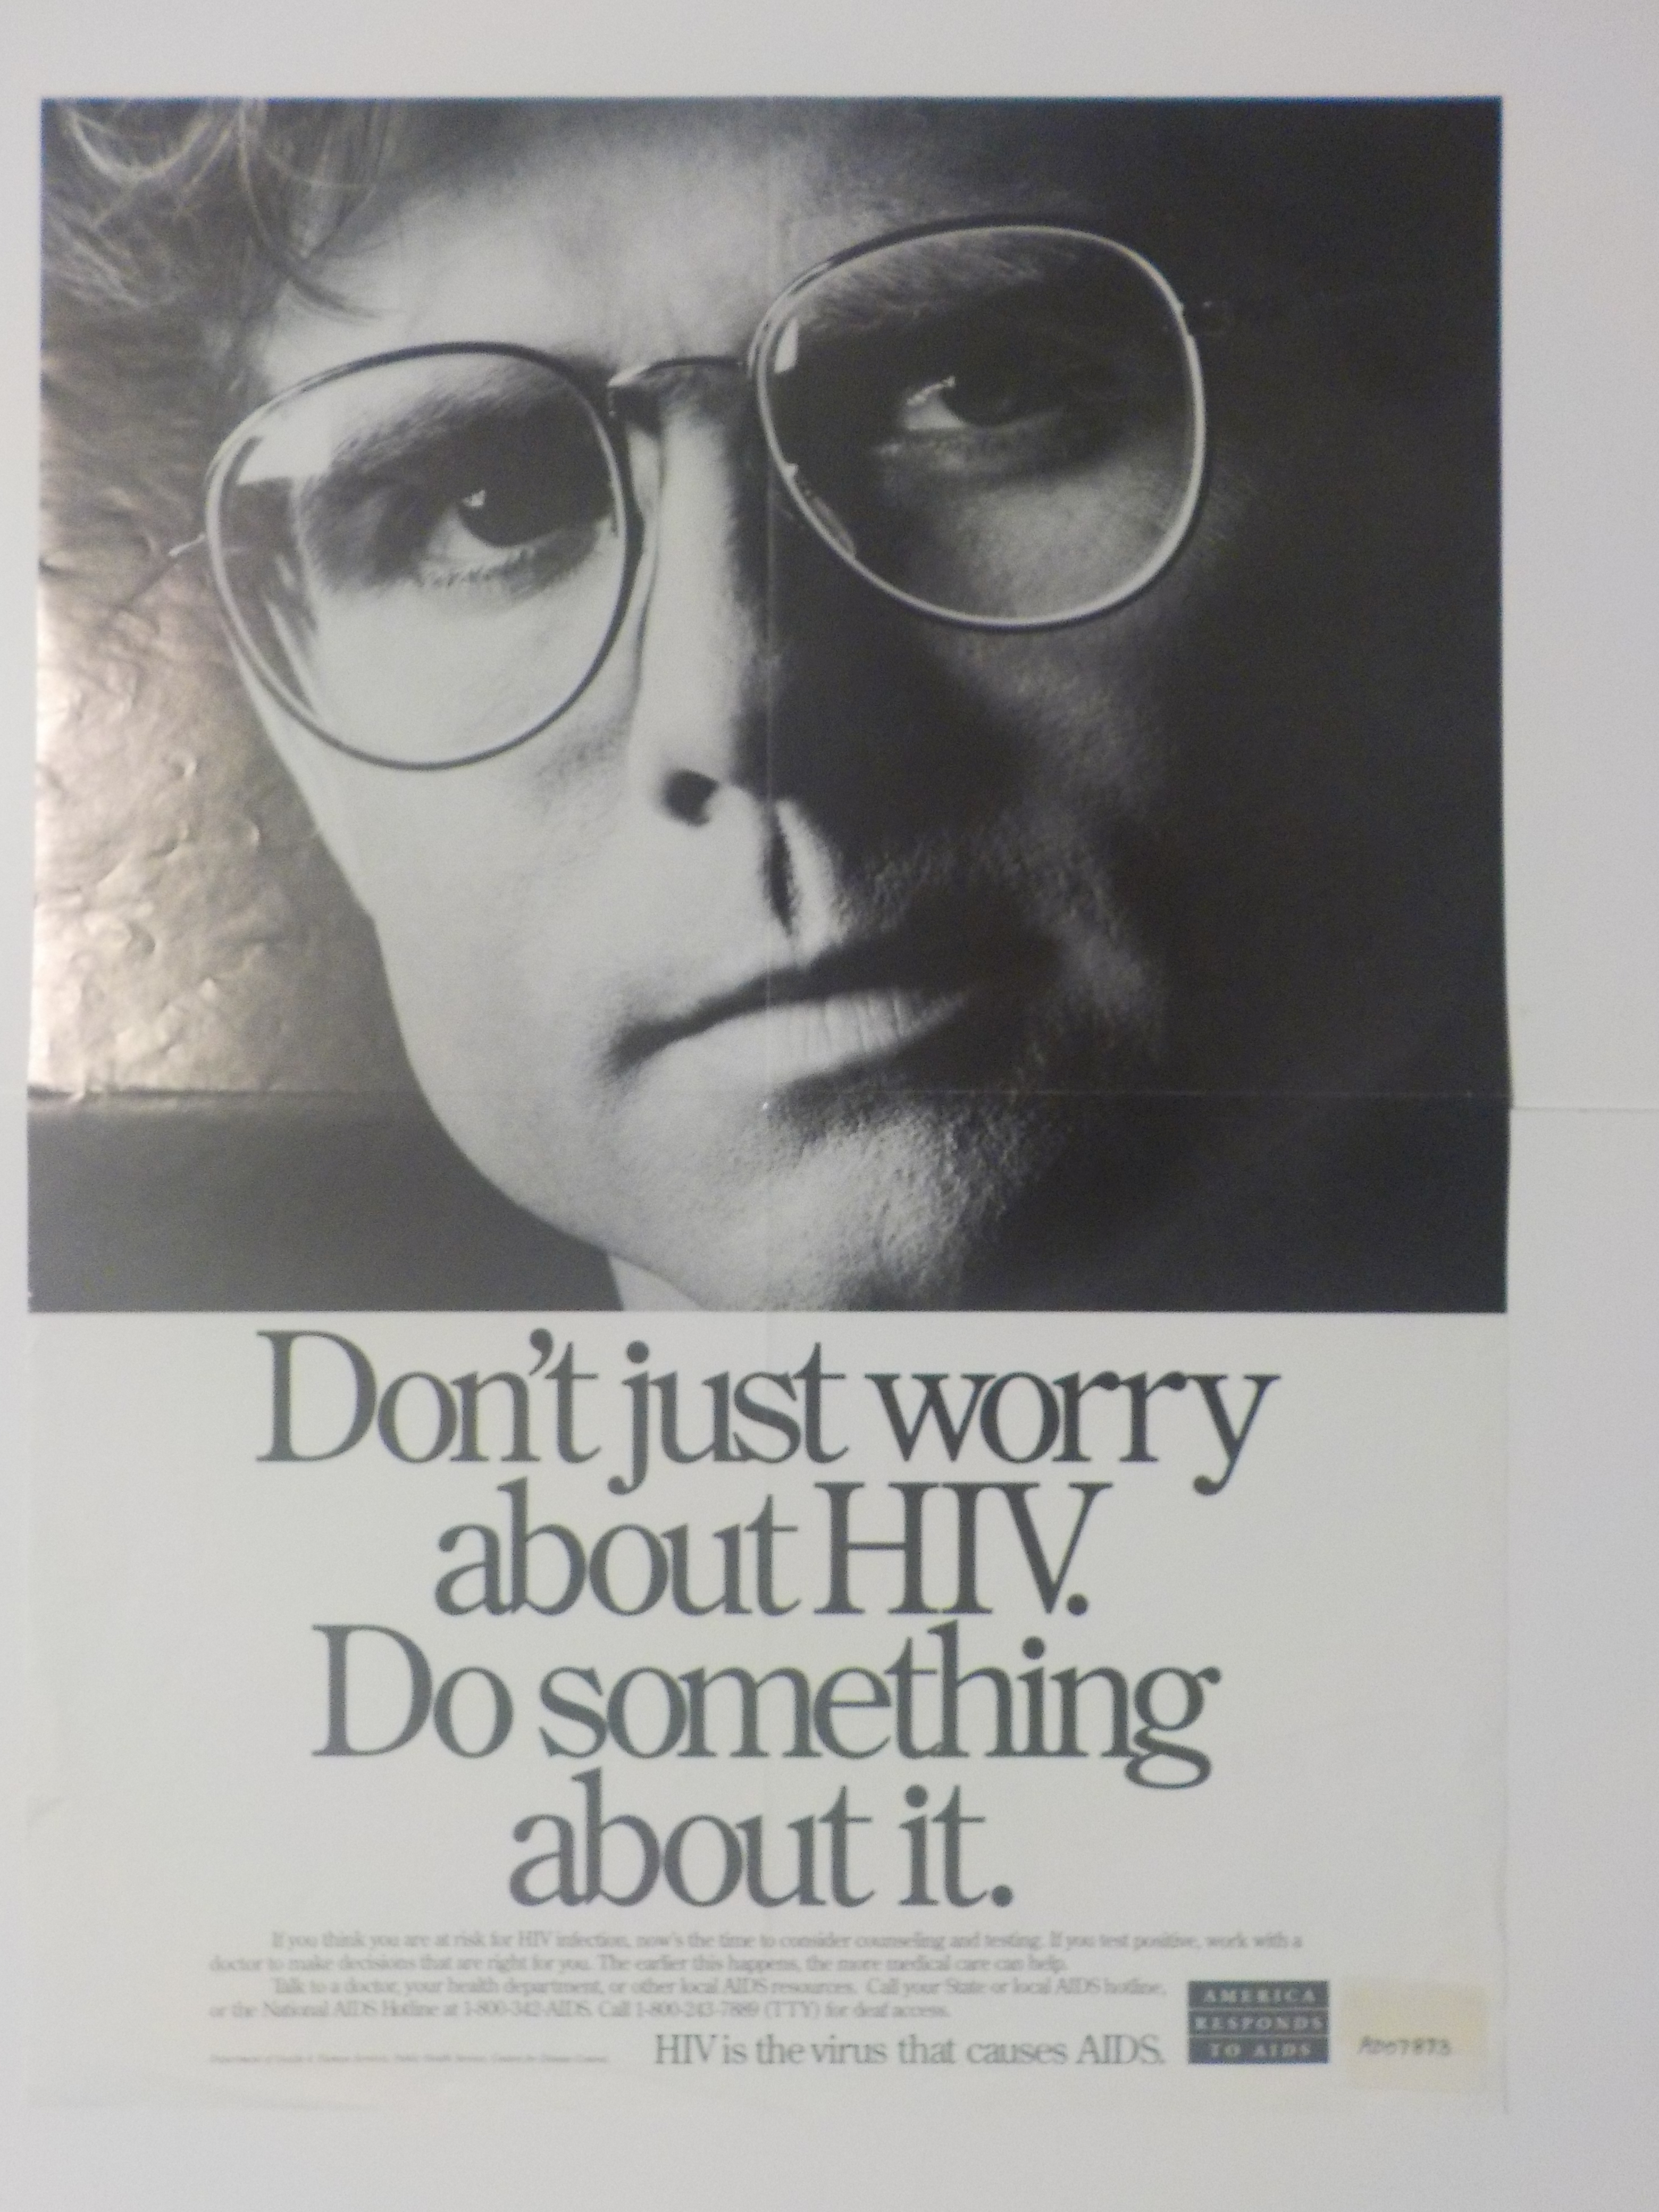 Don't just worry about HIV, do something about it